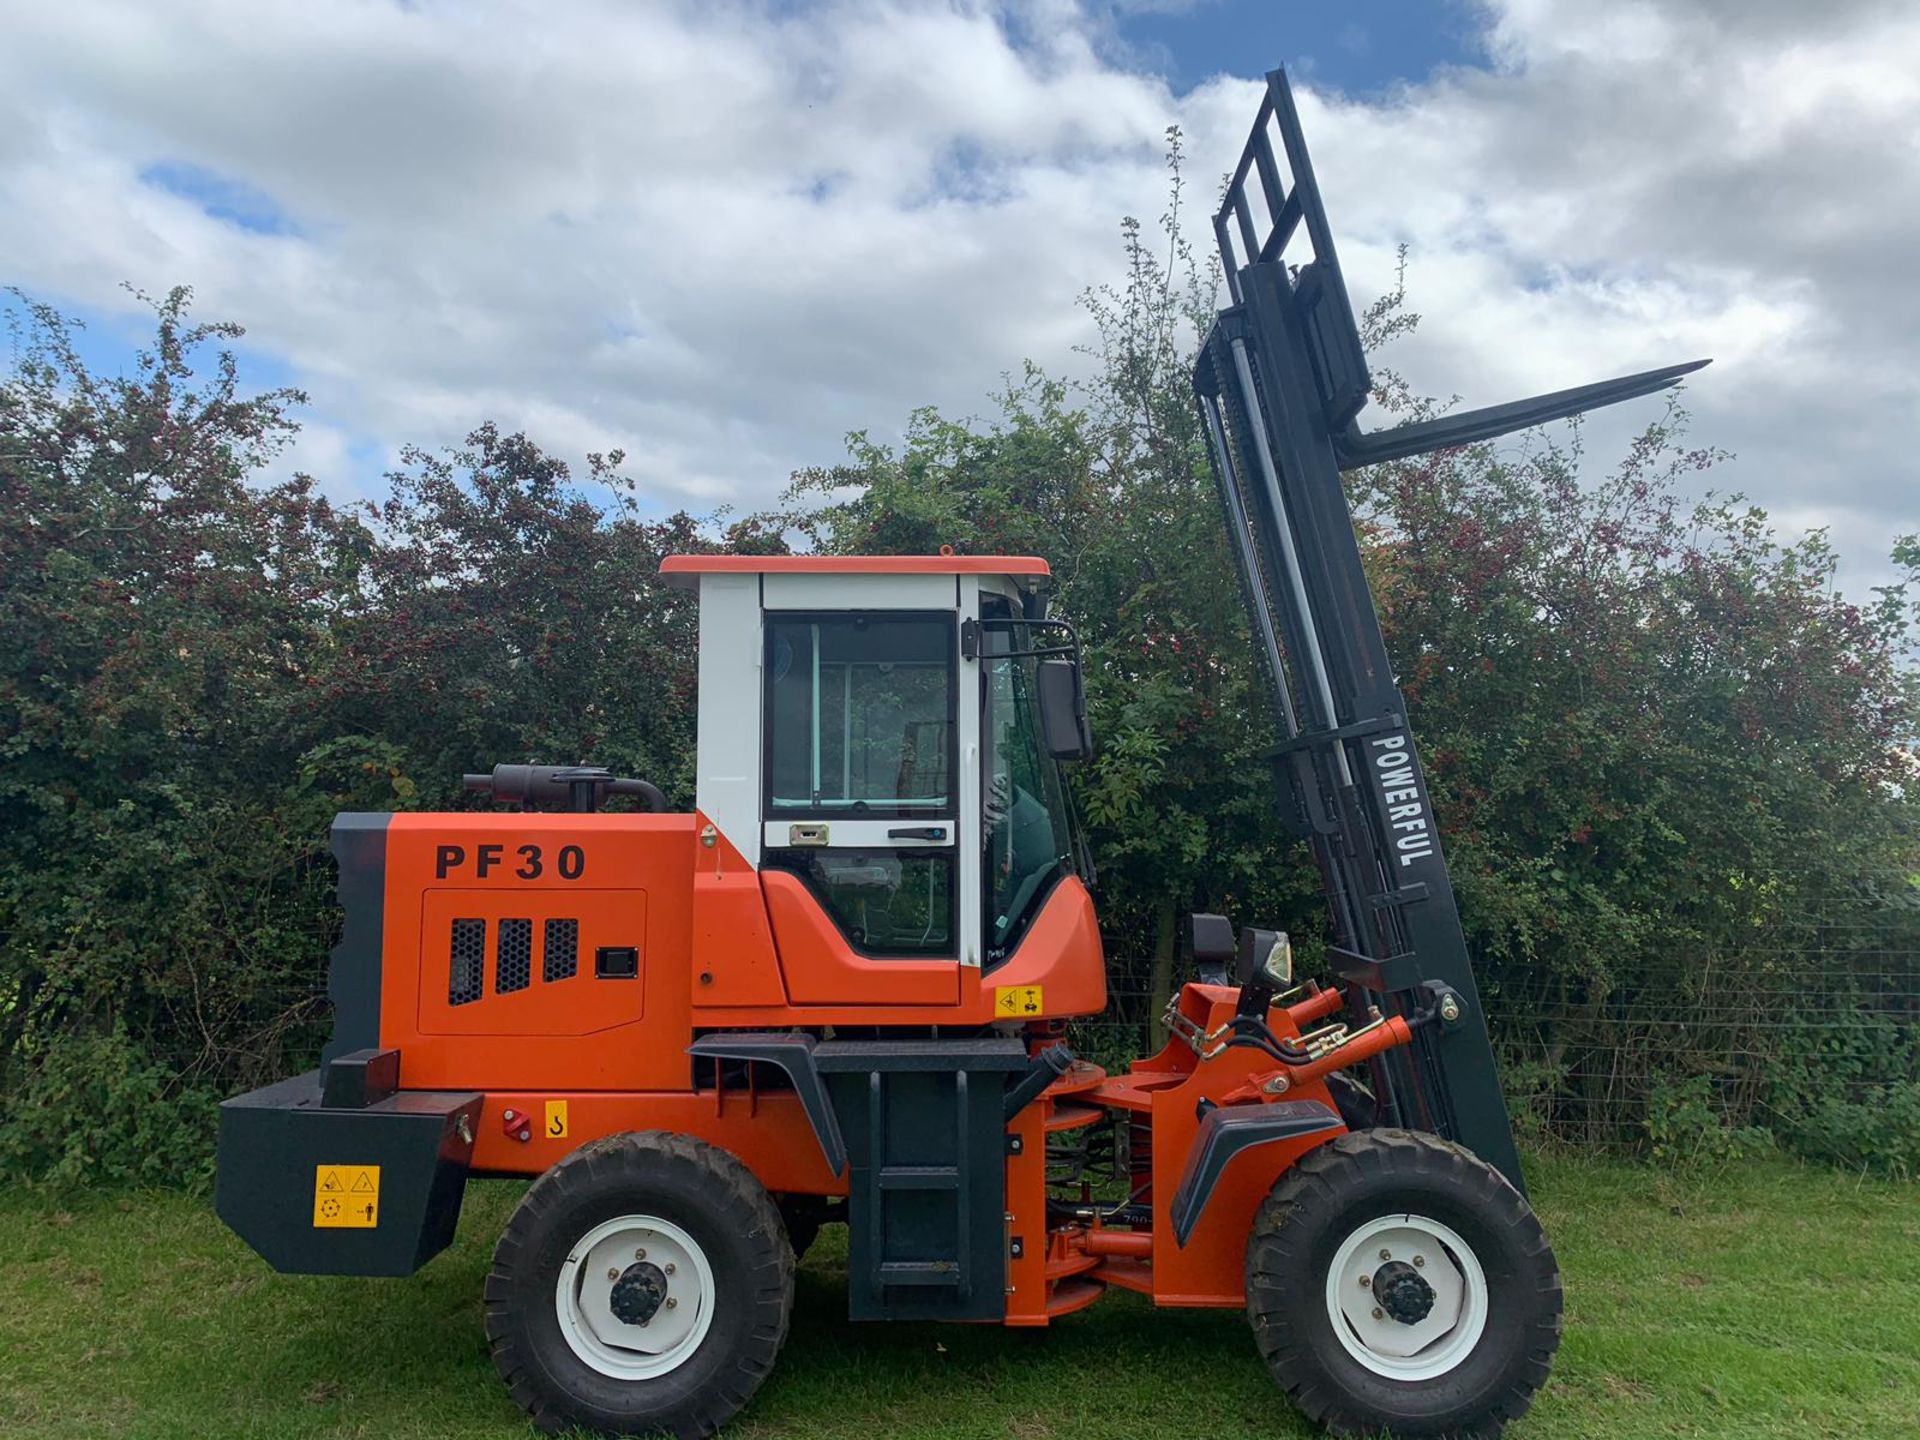 BRAND NEW 2019 ATTACK PF30 4X4 ROUGH TERRAIN POWERFUL FORKLIFT C/W 2 STAGE MAST *PLUS VAT* - Image 3 of 12